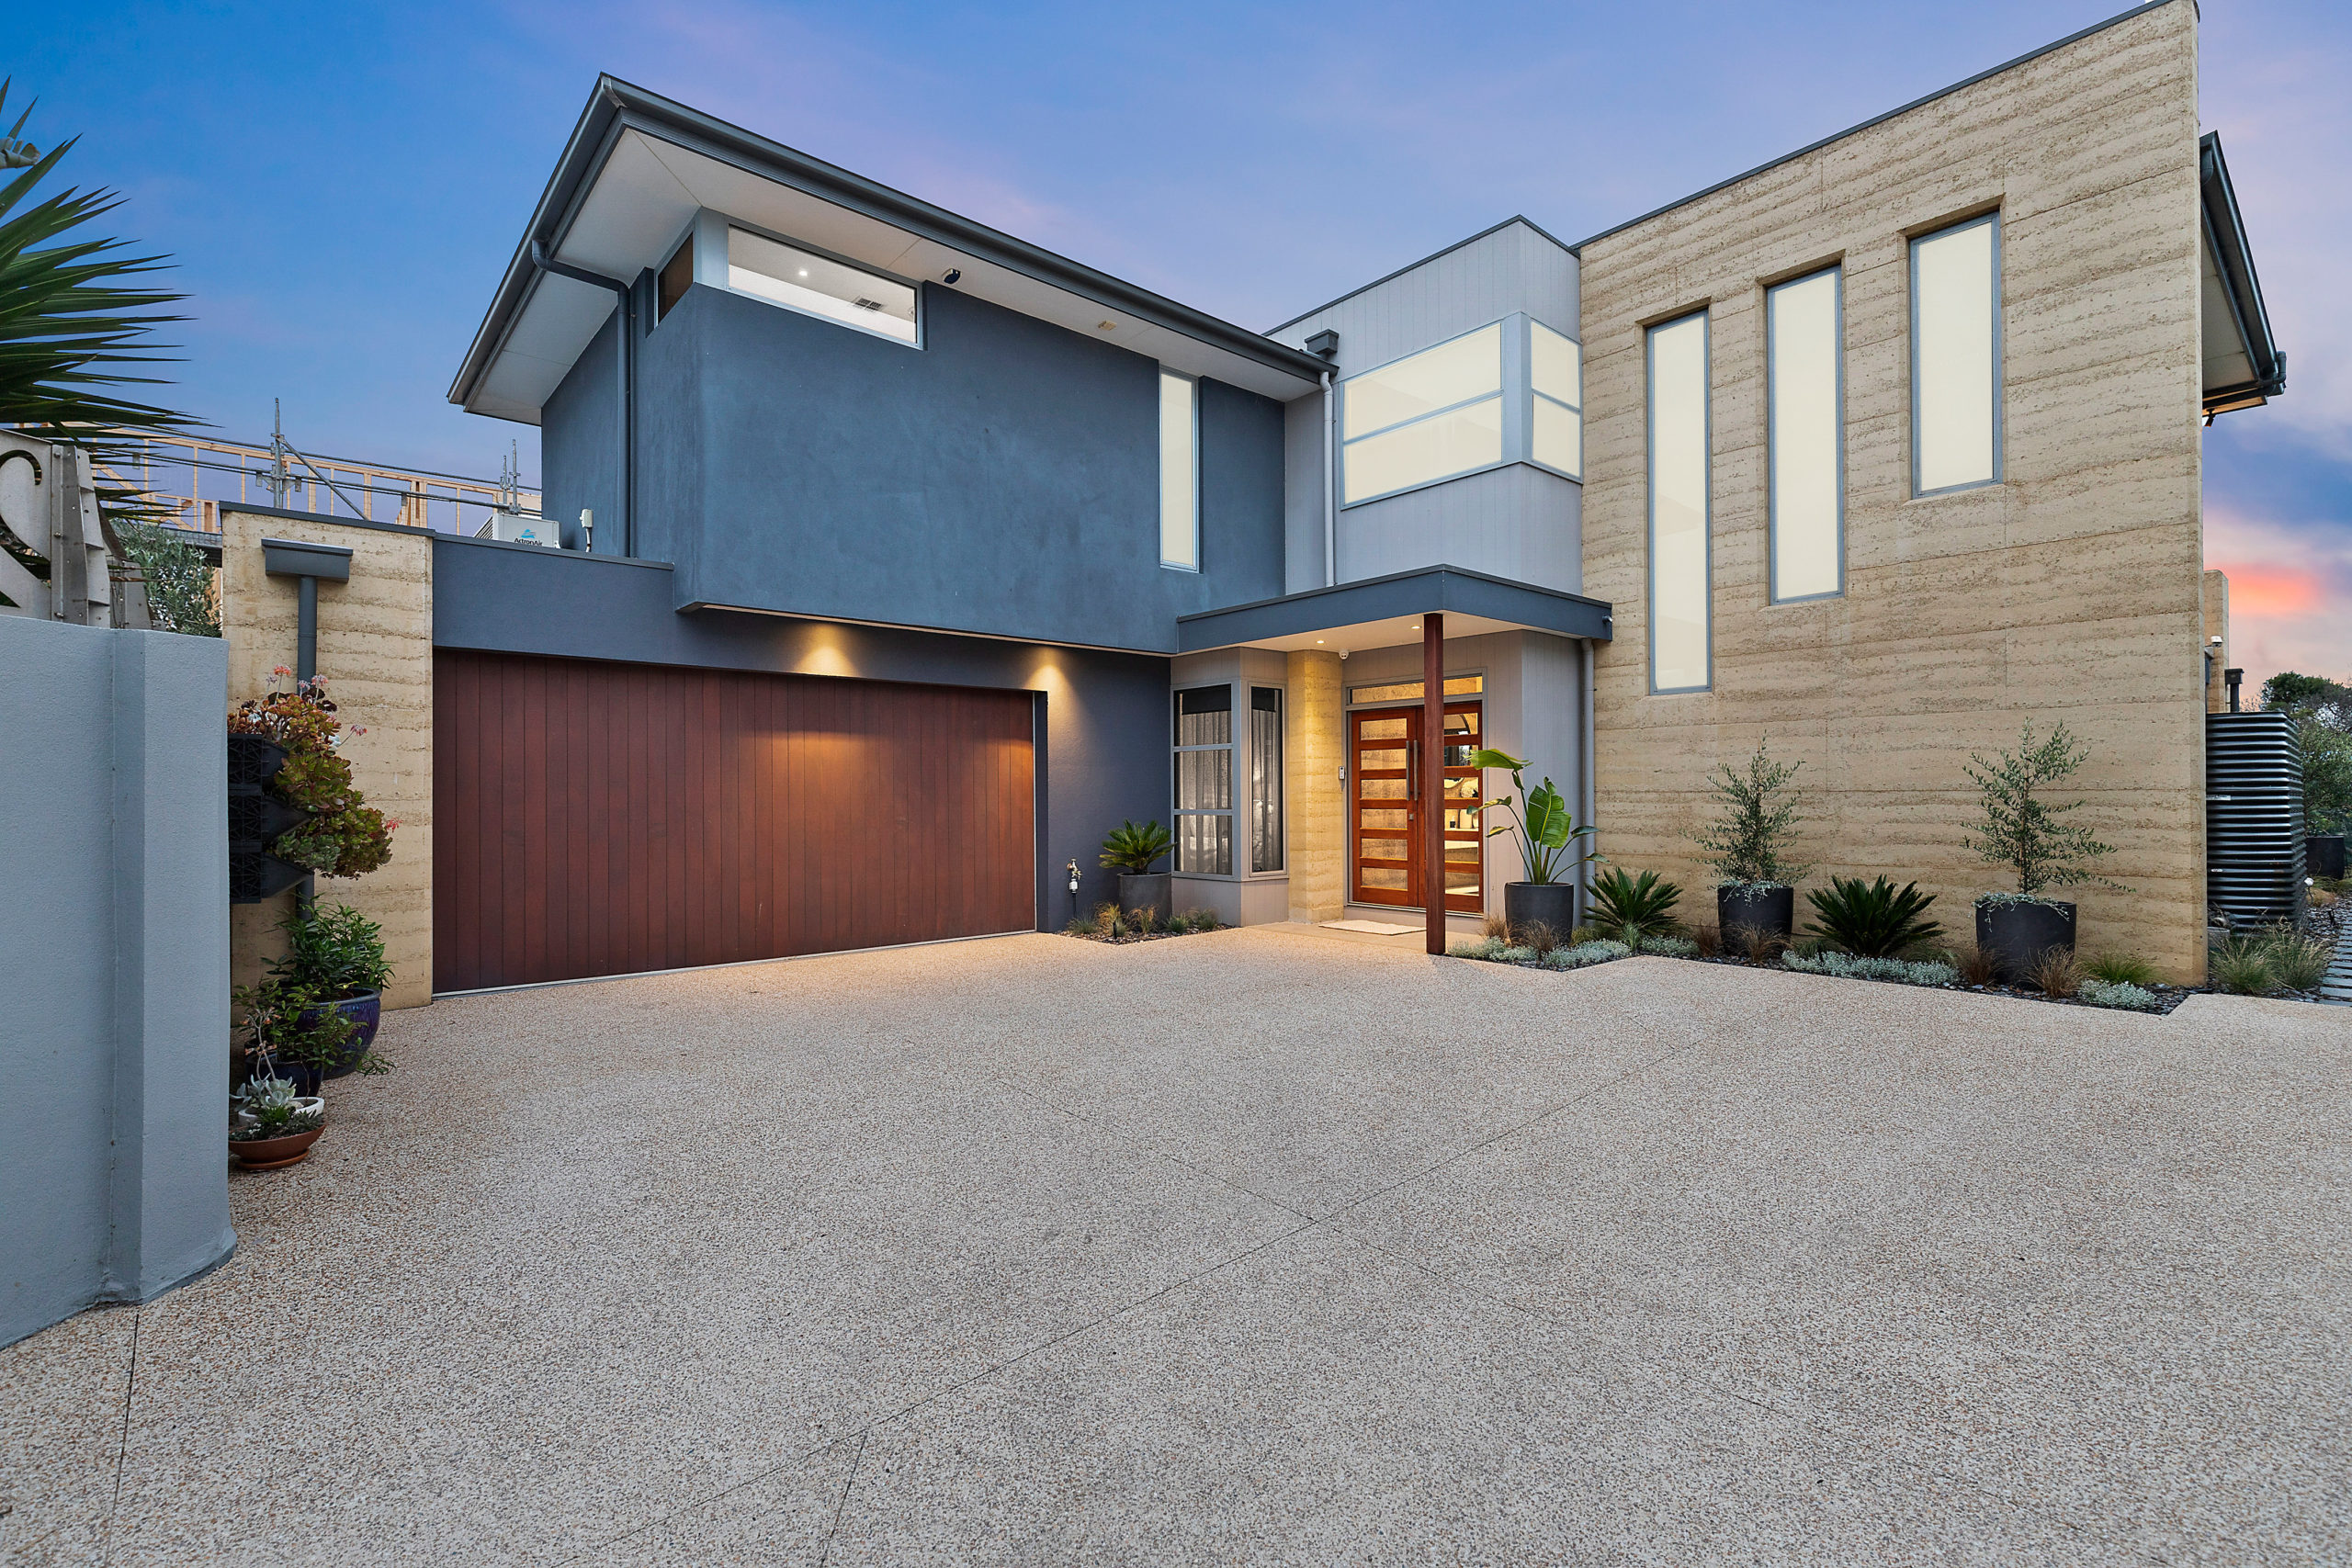 Looking at the front of the home from the driveway, Rammed earth walls are featured. These are complemented by rendered walls and vertical grooved timber panelling. The garage door is in vertical timber look panels to finish of the façade.